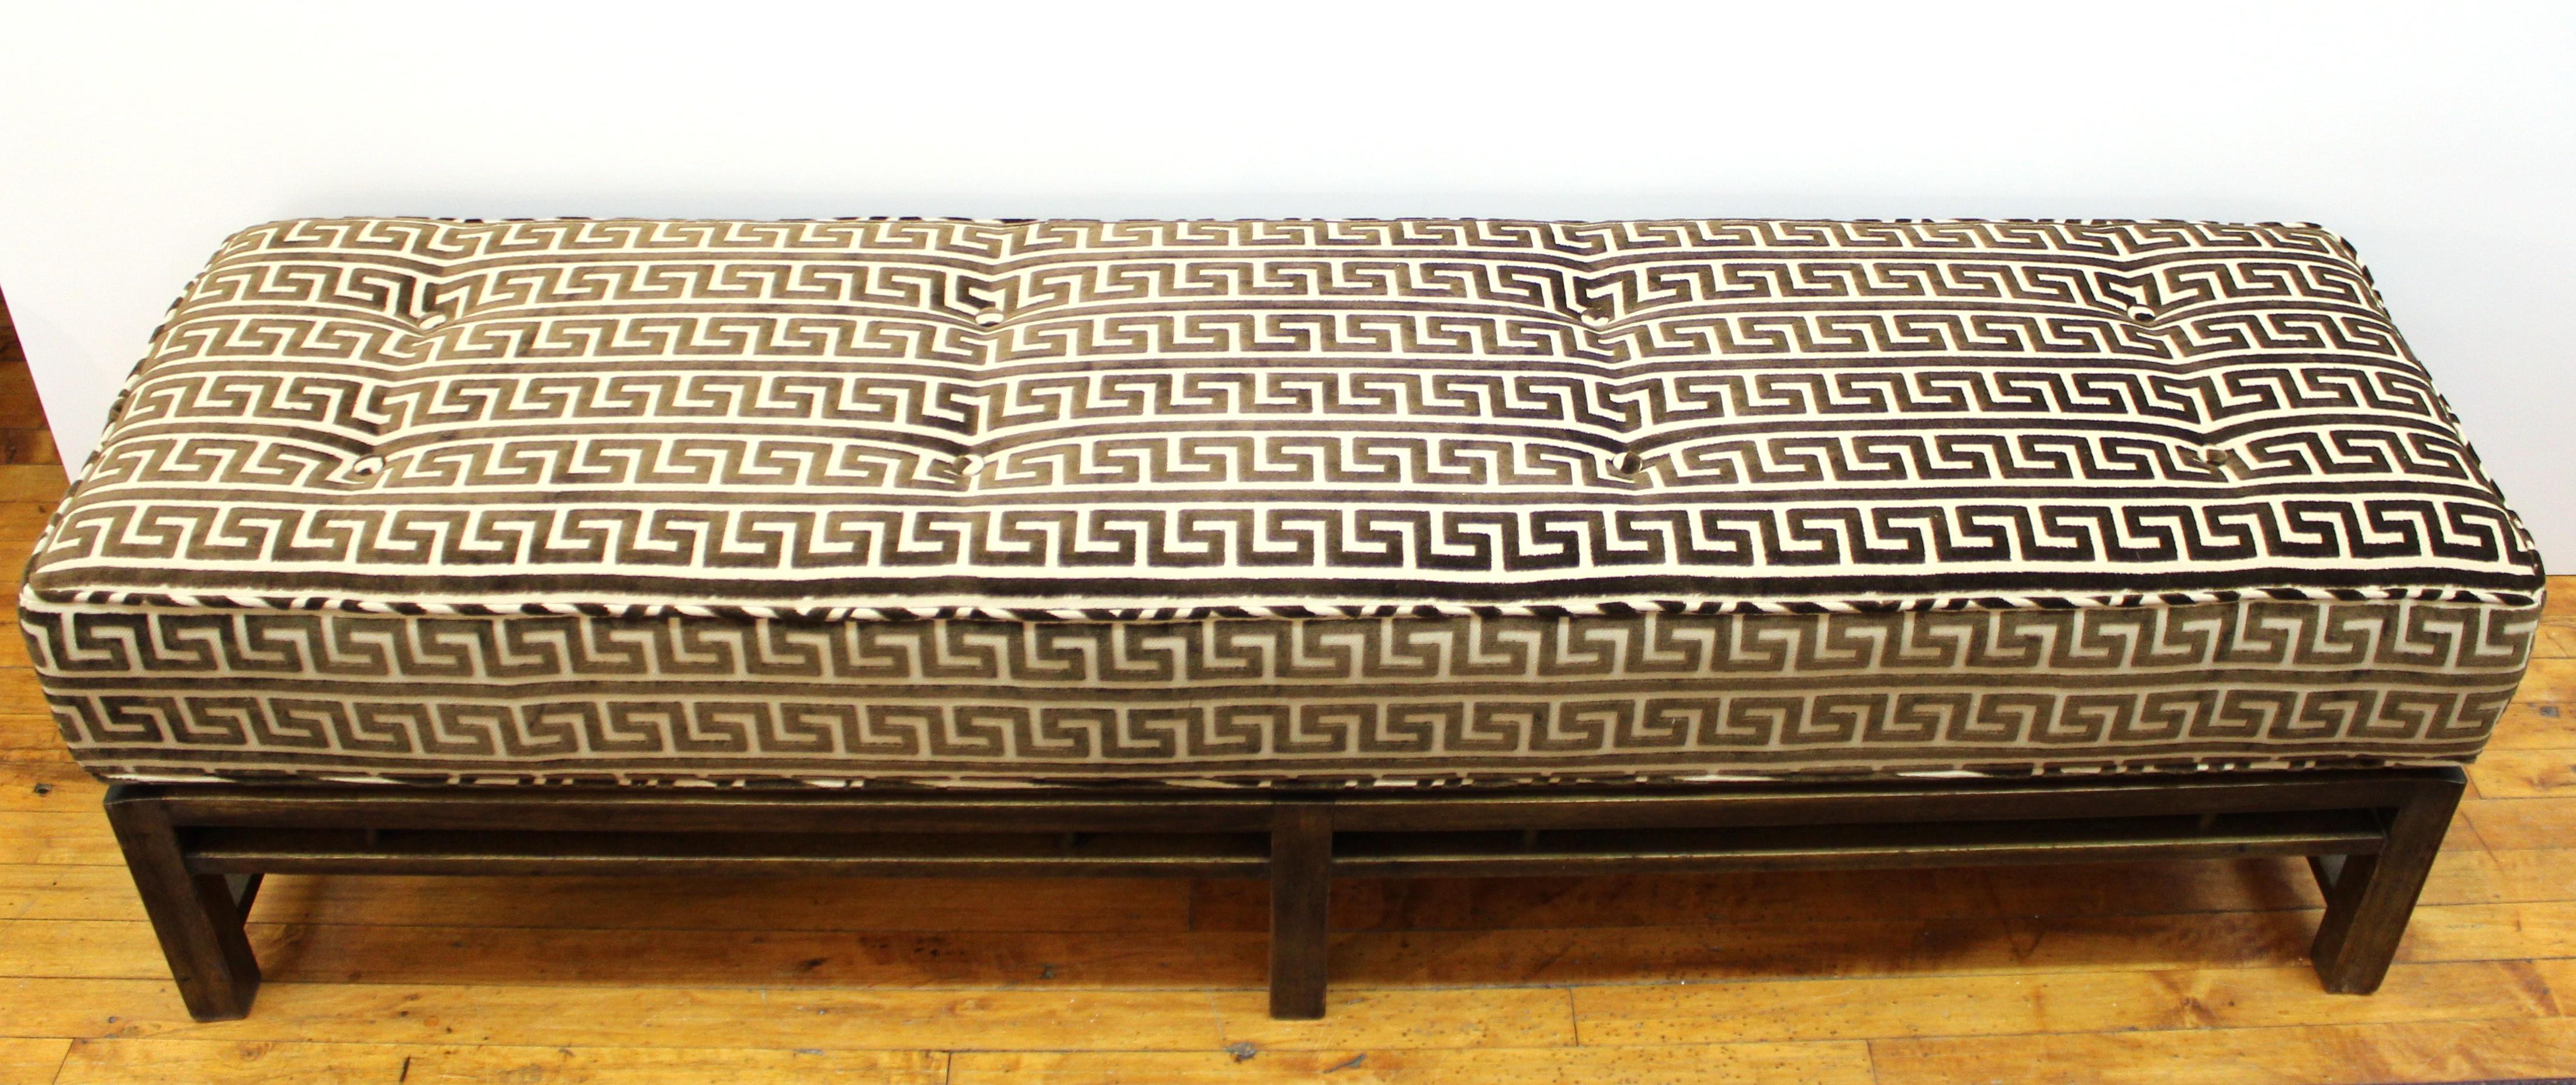 American Mid-Century Modern long walnut bench designed in the 1950s by Edward Wormley for Dunbar. The piece has been newly reupholstered in a Lee Jofa Greek key cut velvet. The piece is in excellent condition.